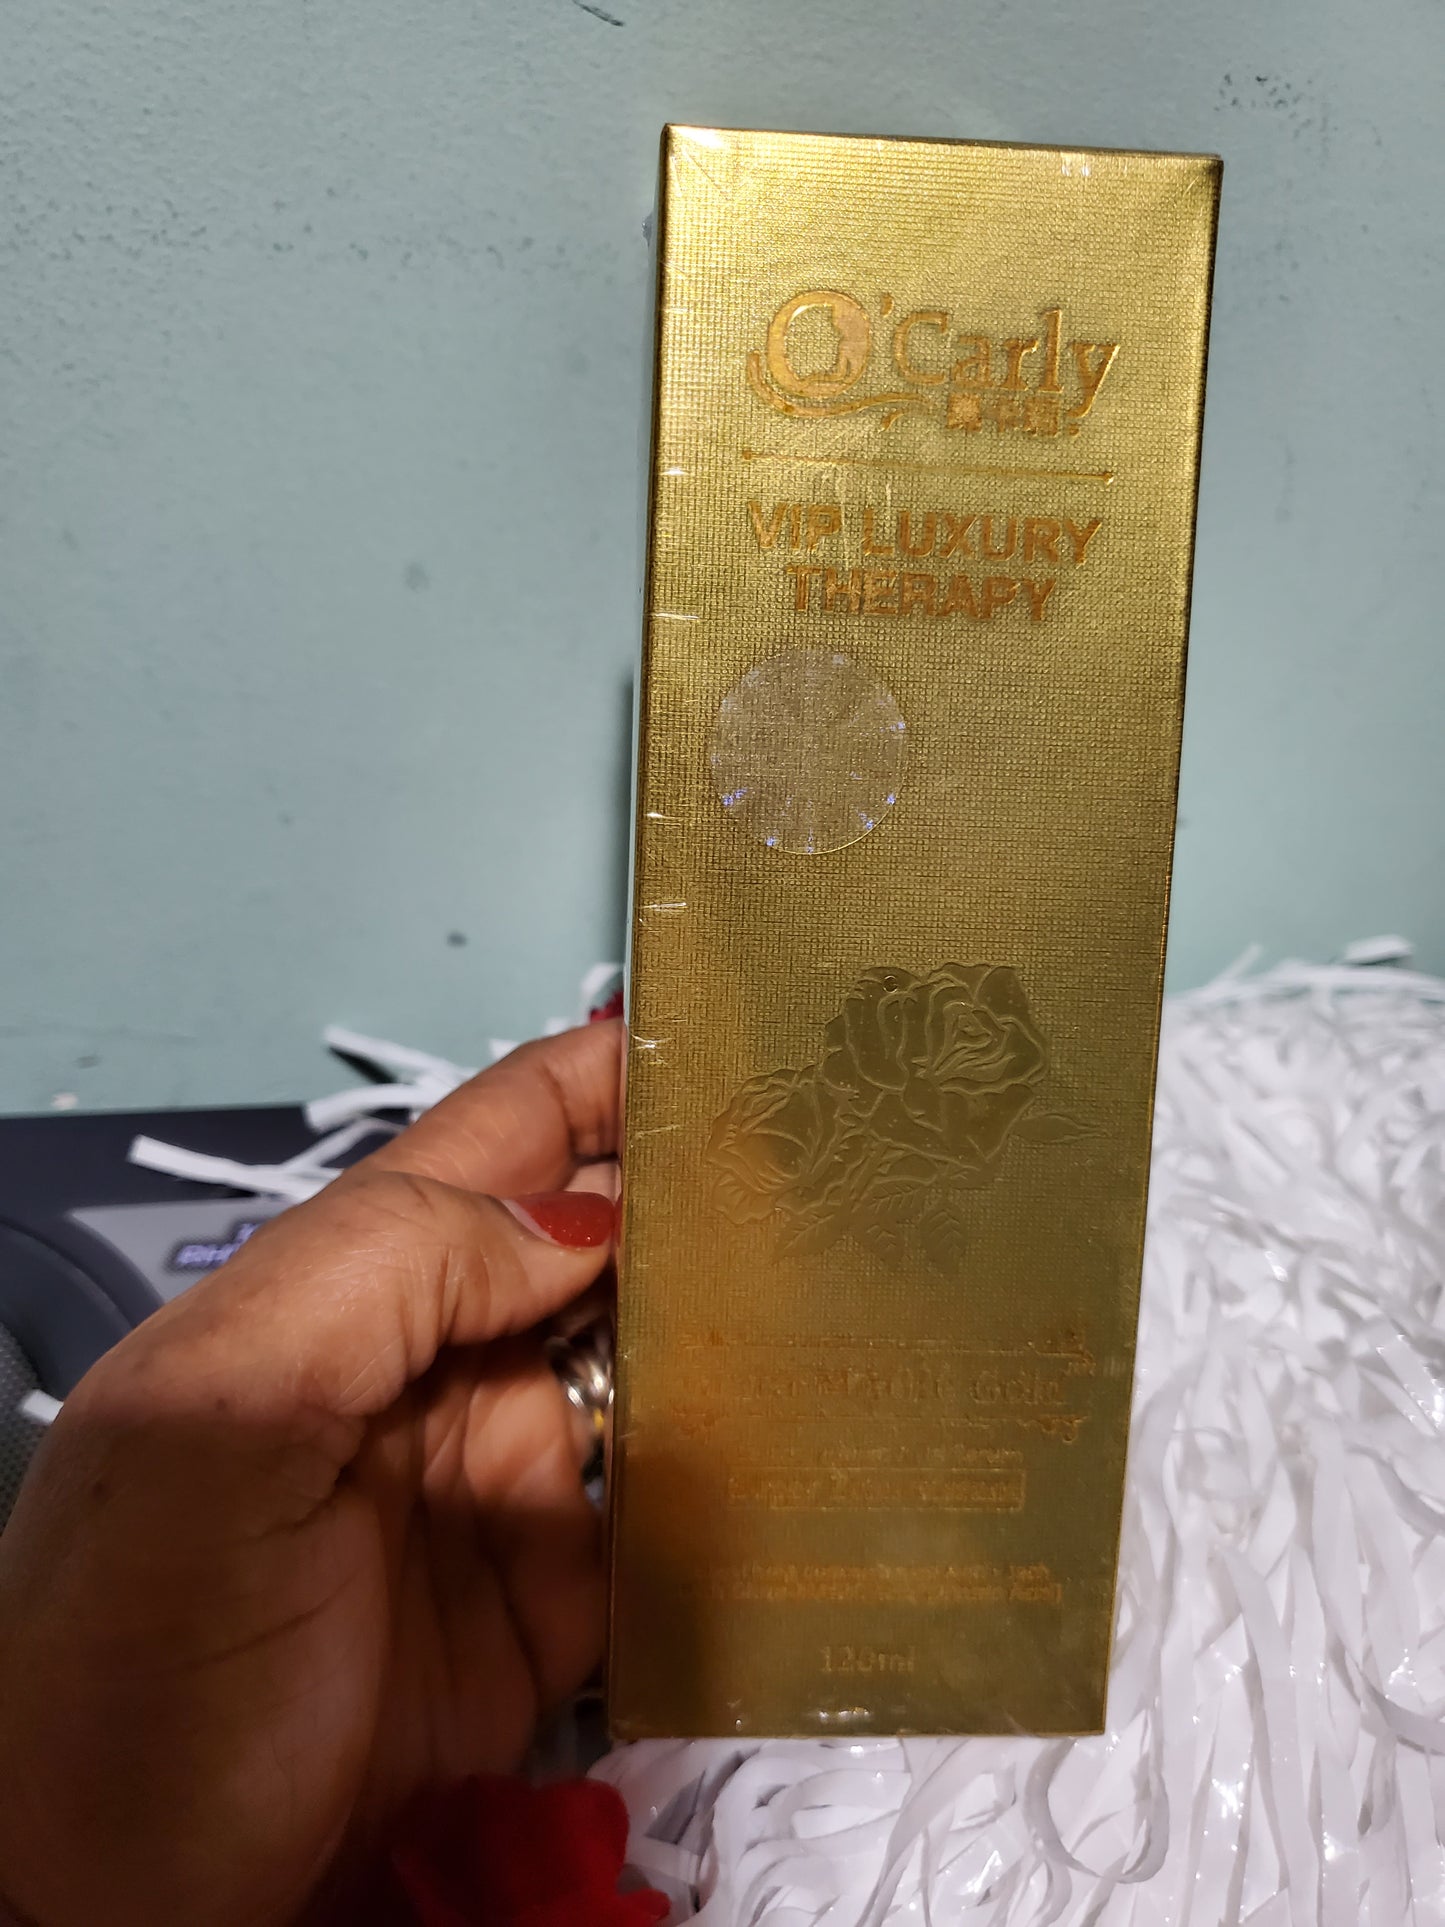 VIP LUXURY amino acid therapy serum/oil. gluta magic gold concentrad, strong Eclaircissant. Powerful anti stains and discolorations. You can mix into your body lotion